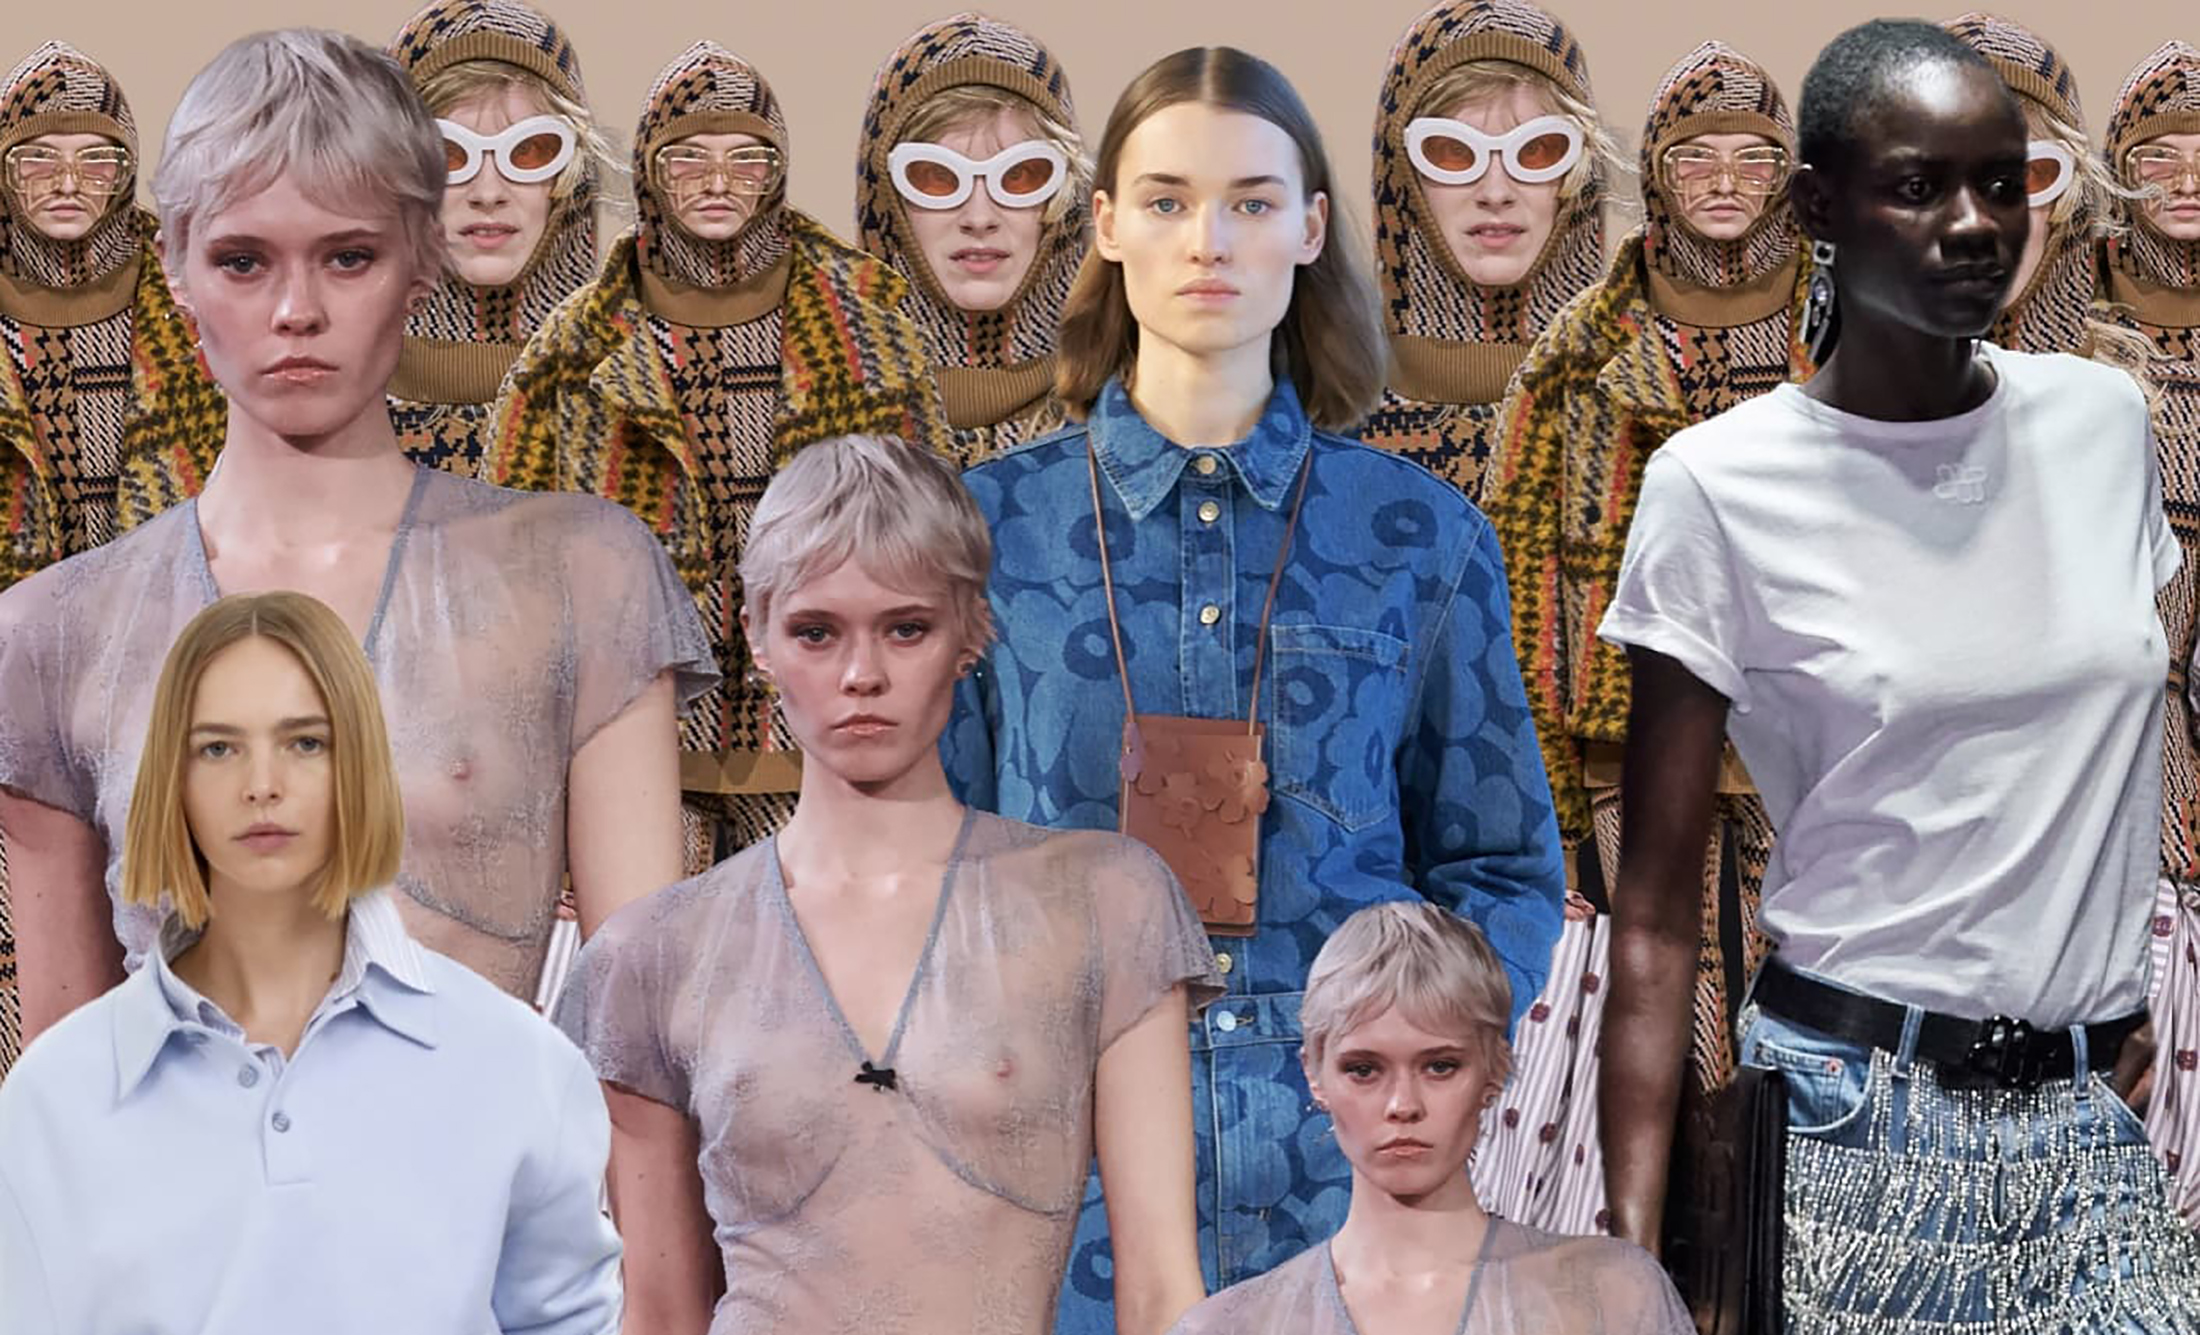 What to Expect at Copenhagen Fashion Week